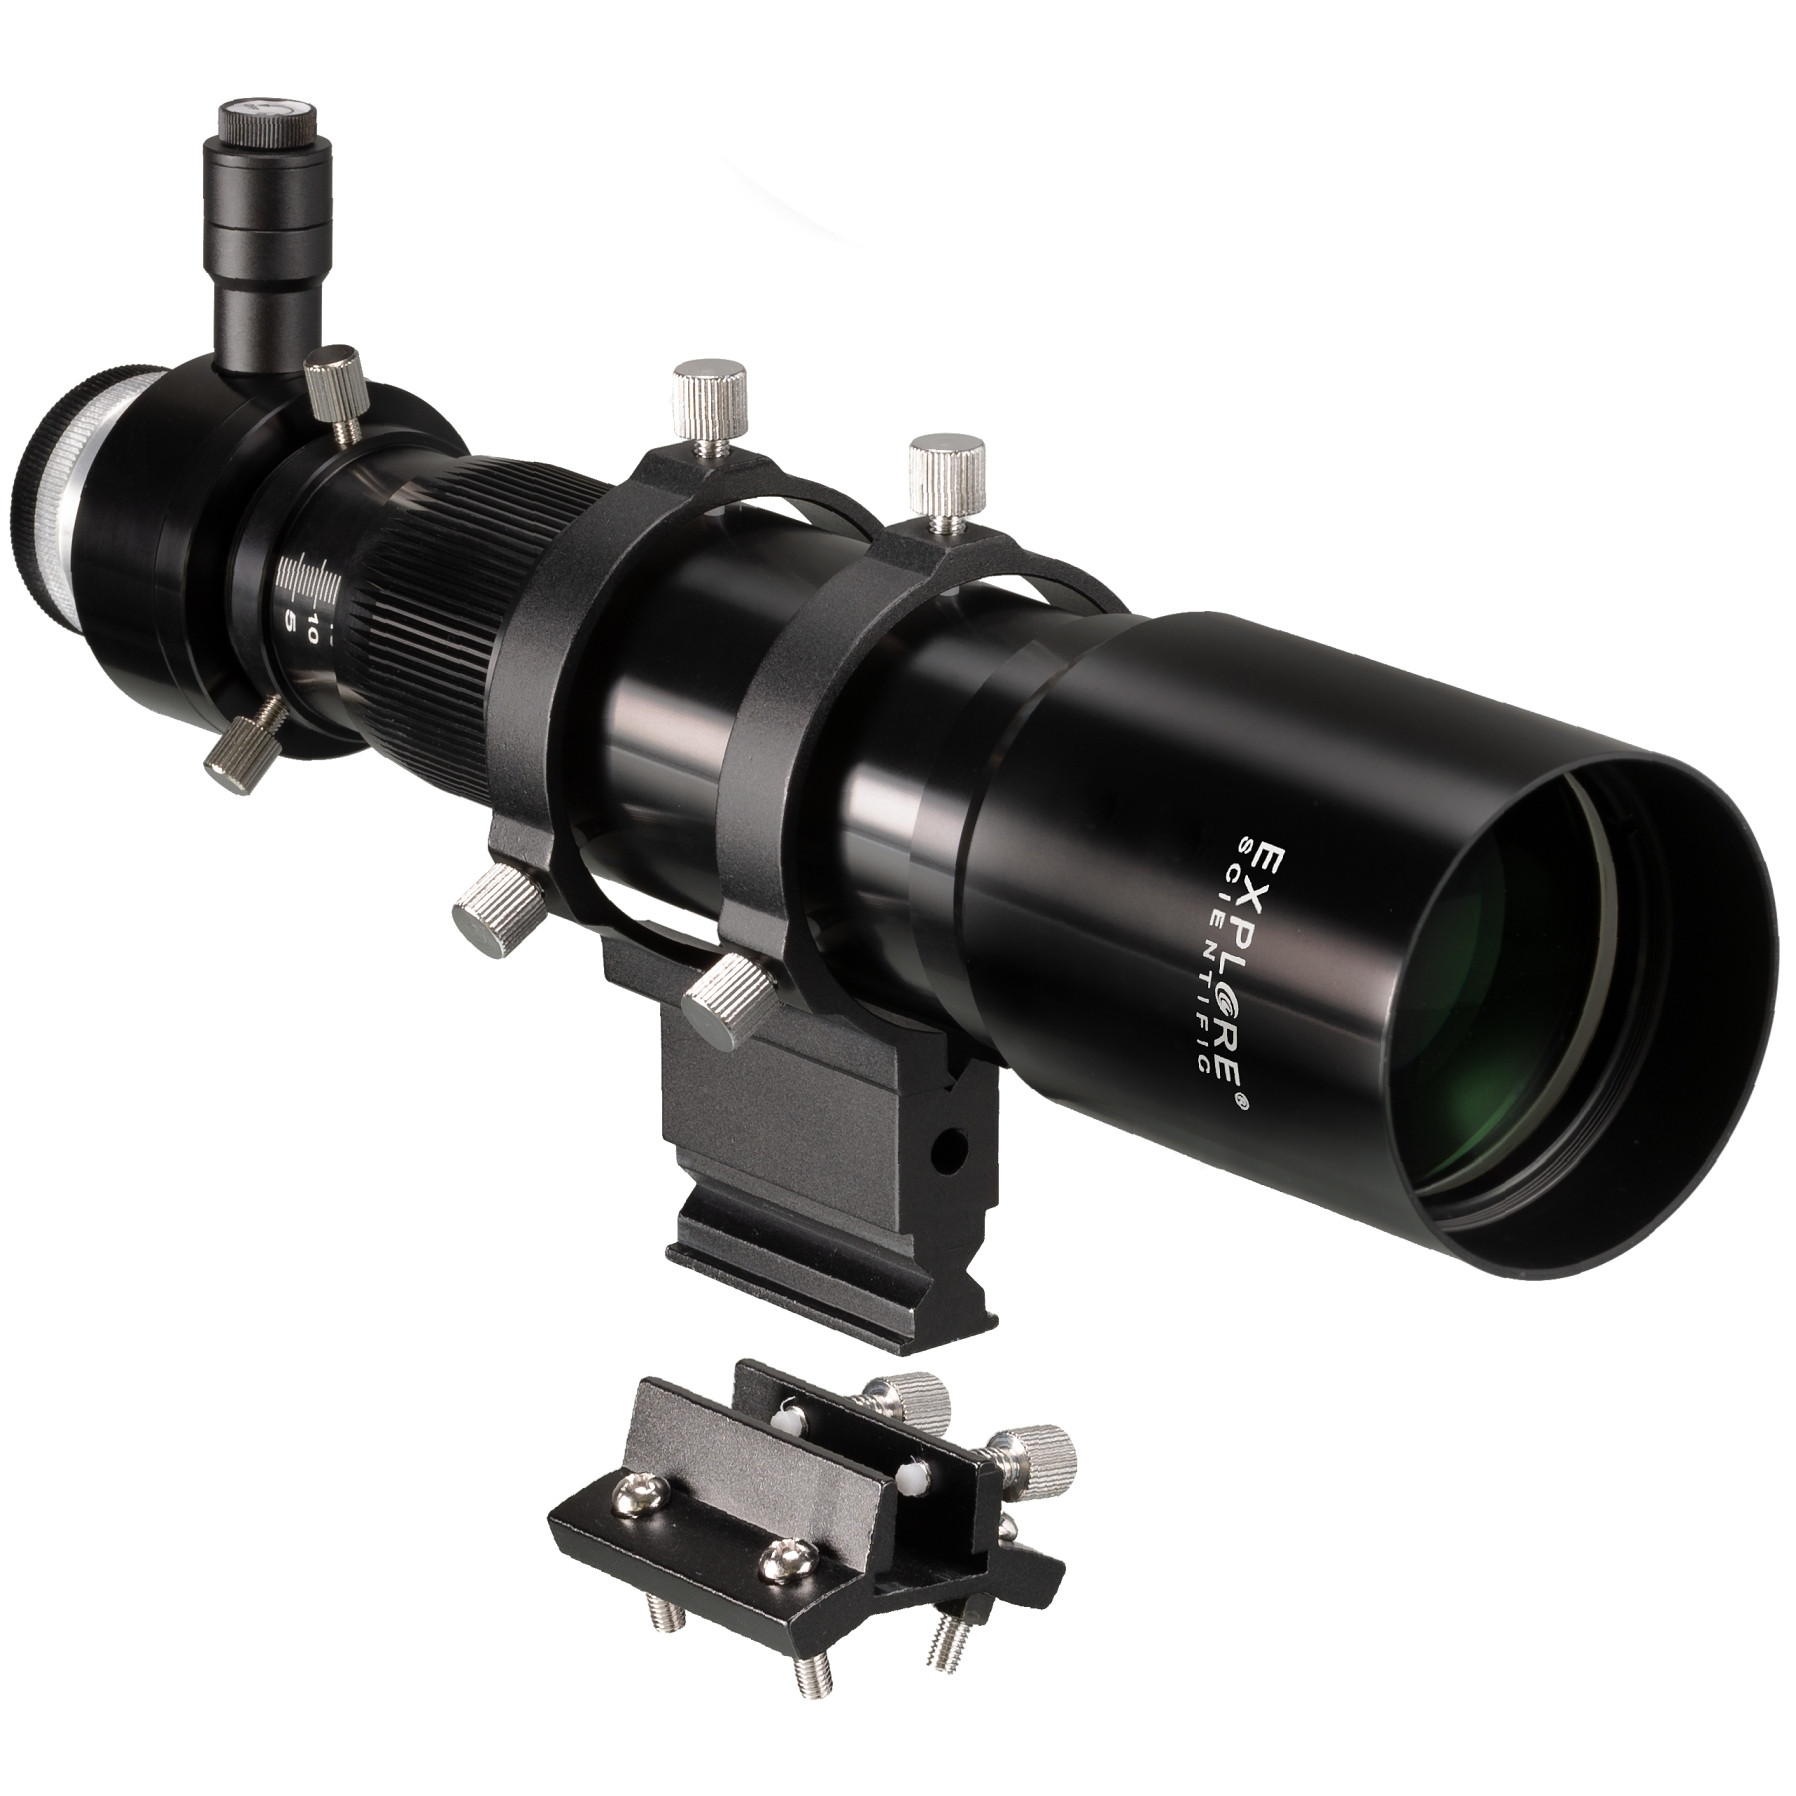 Explore Scientific 10x60 Finder and Guide Scope with Helical Focuser 1.25 inch and T2